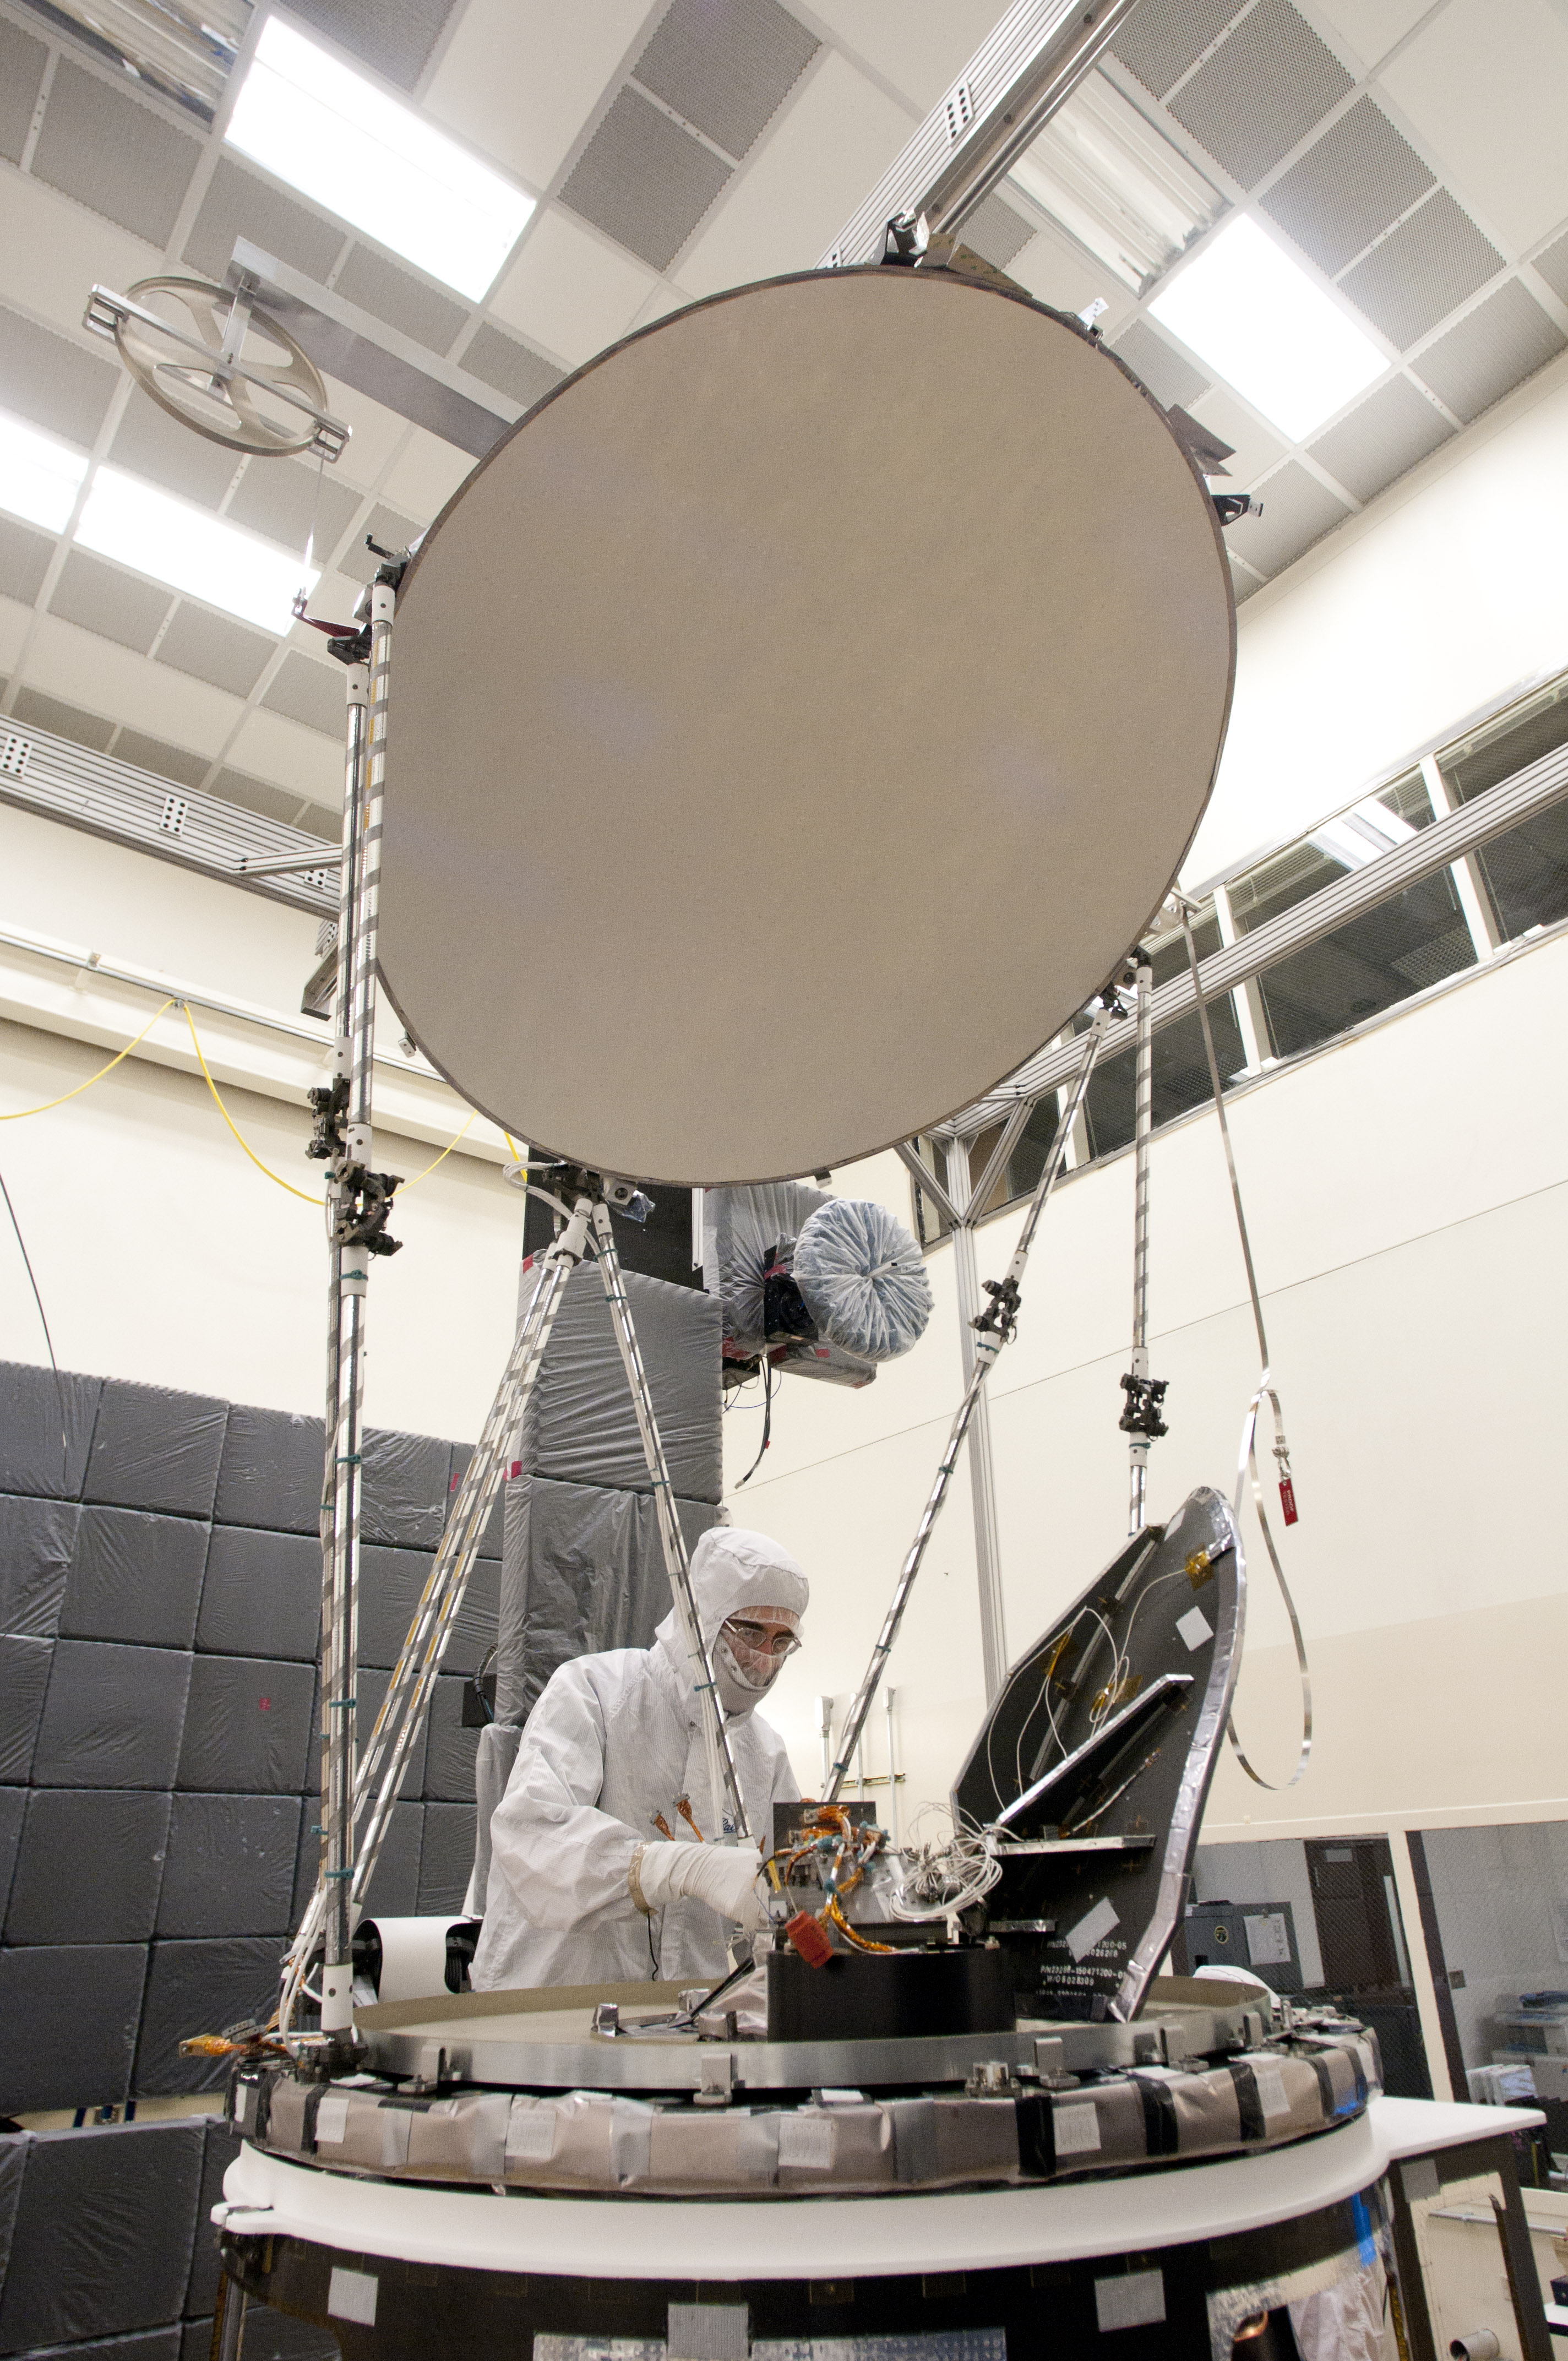 Engineer working on the GMI in a lab, with large reflictive dish in center.